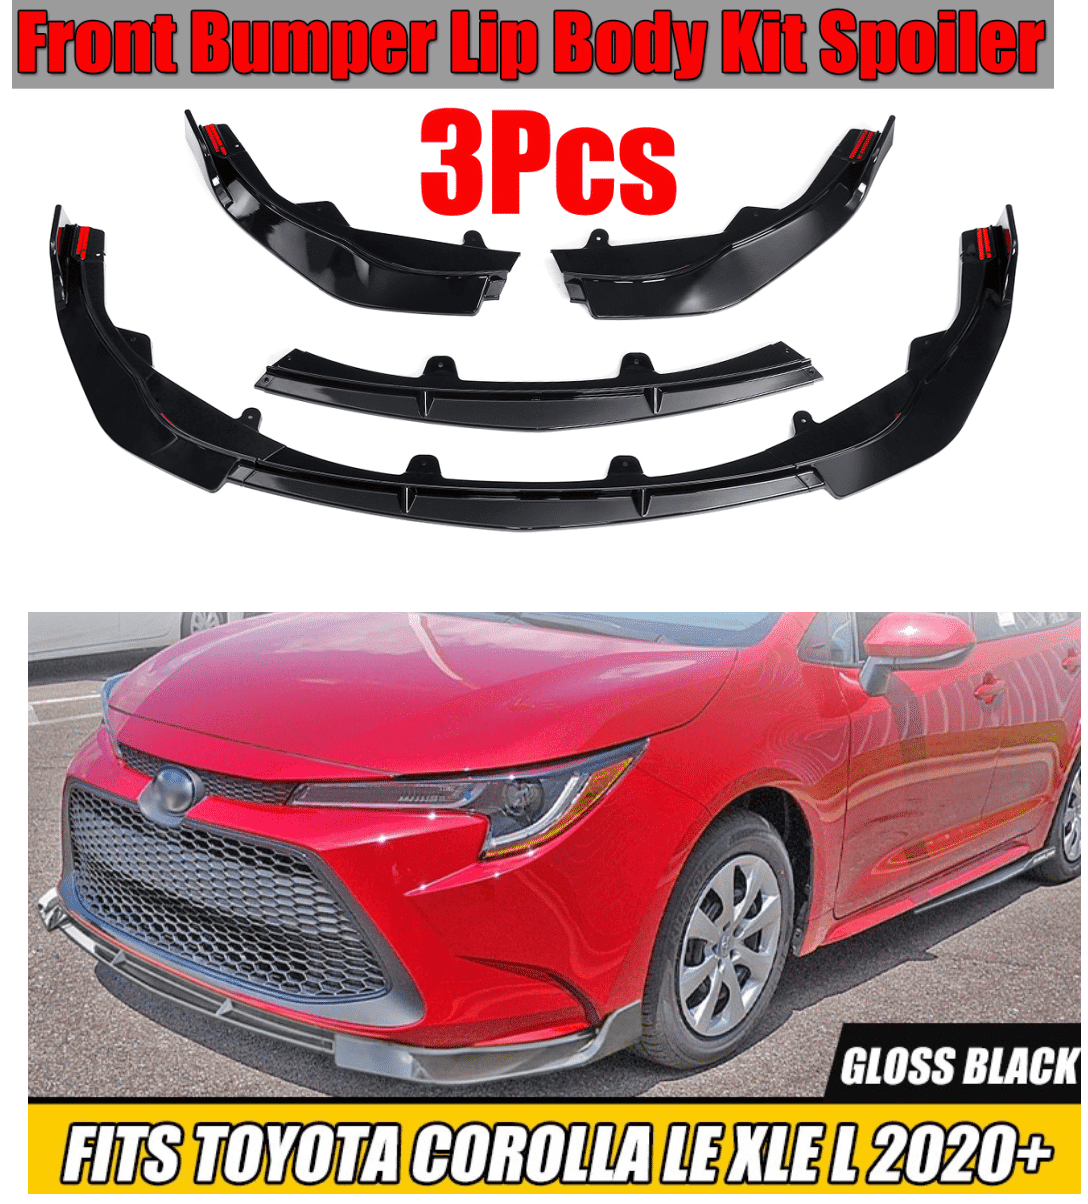  Universal Front Bumper Lip Kit, Car Front Bumper Spoiler  Splitter Body Kit Side Skirt Front Bumper Protector Guard Scratch-Resistant  fits for Toyot Glossy Black : Automotive